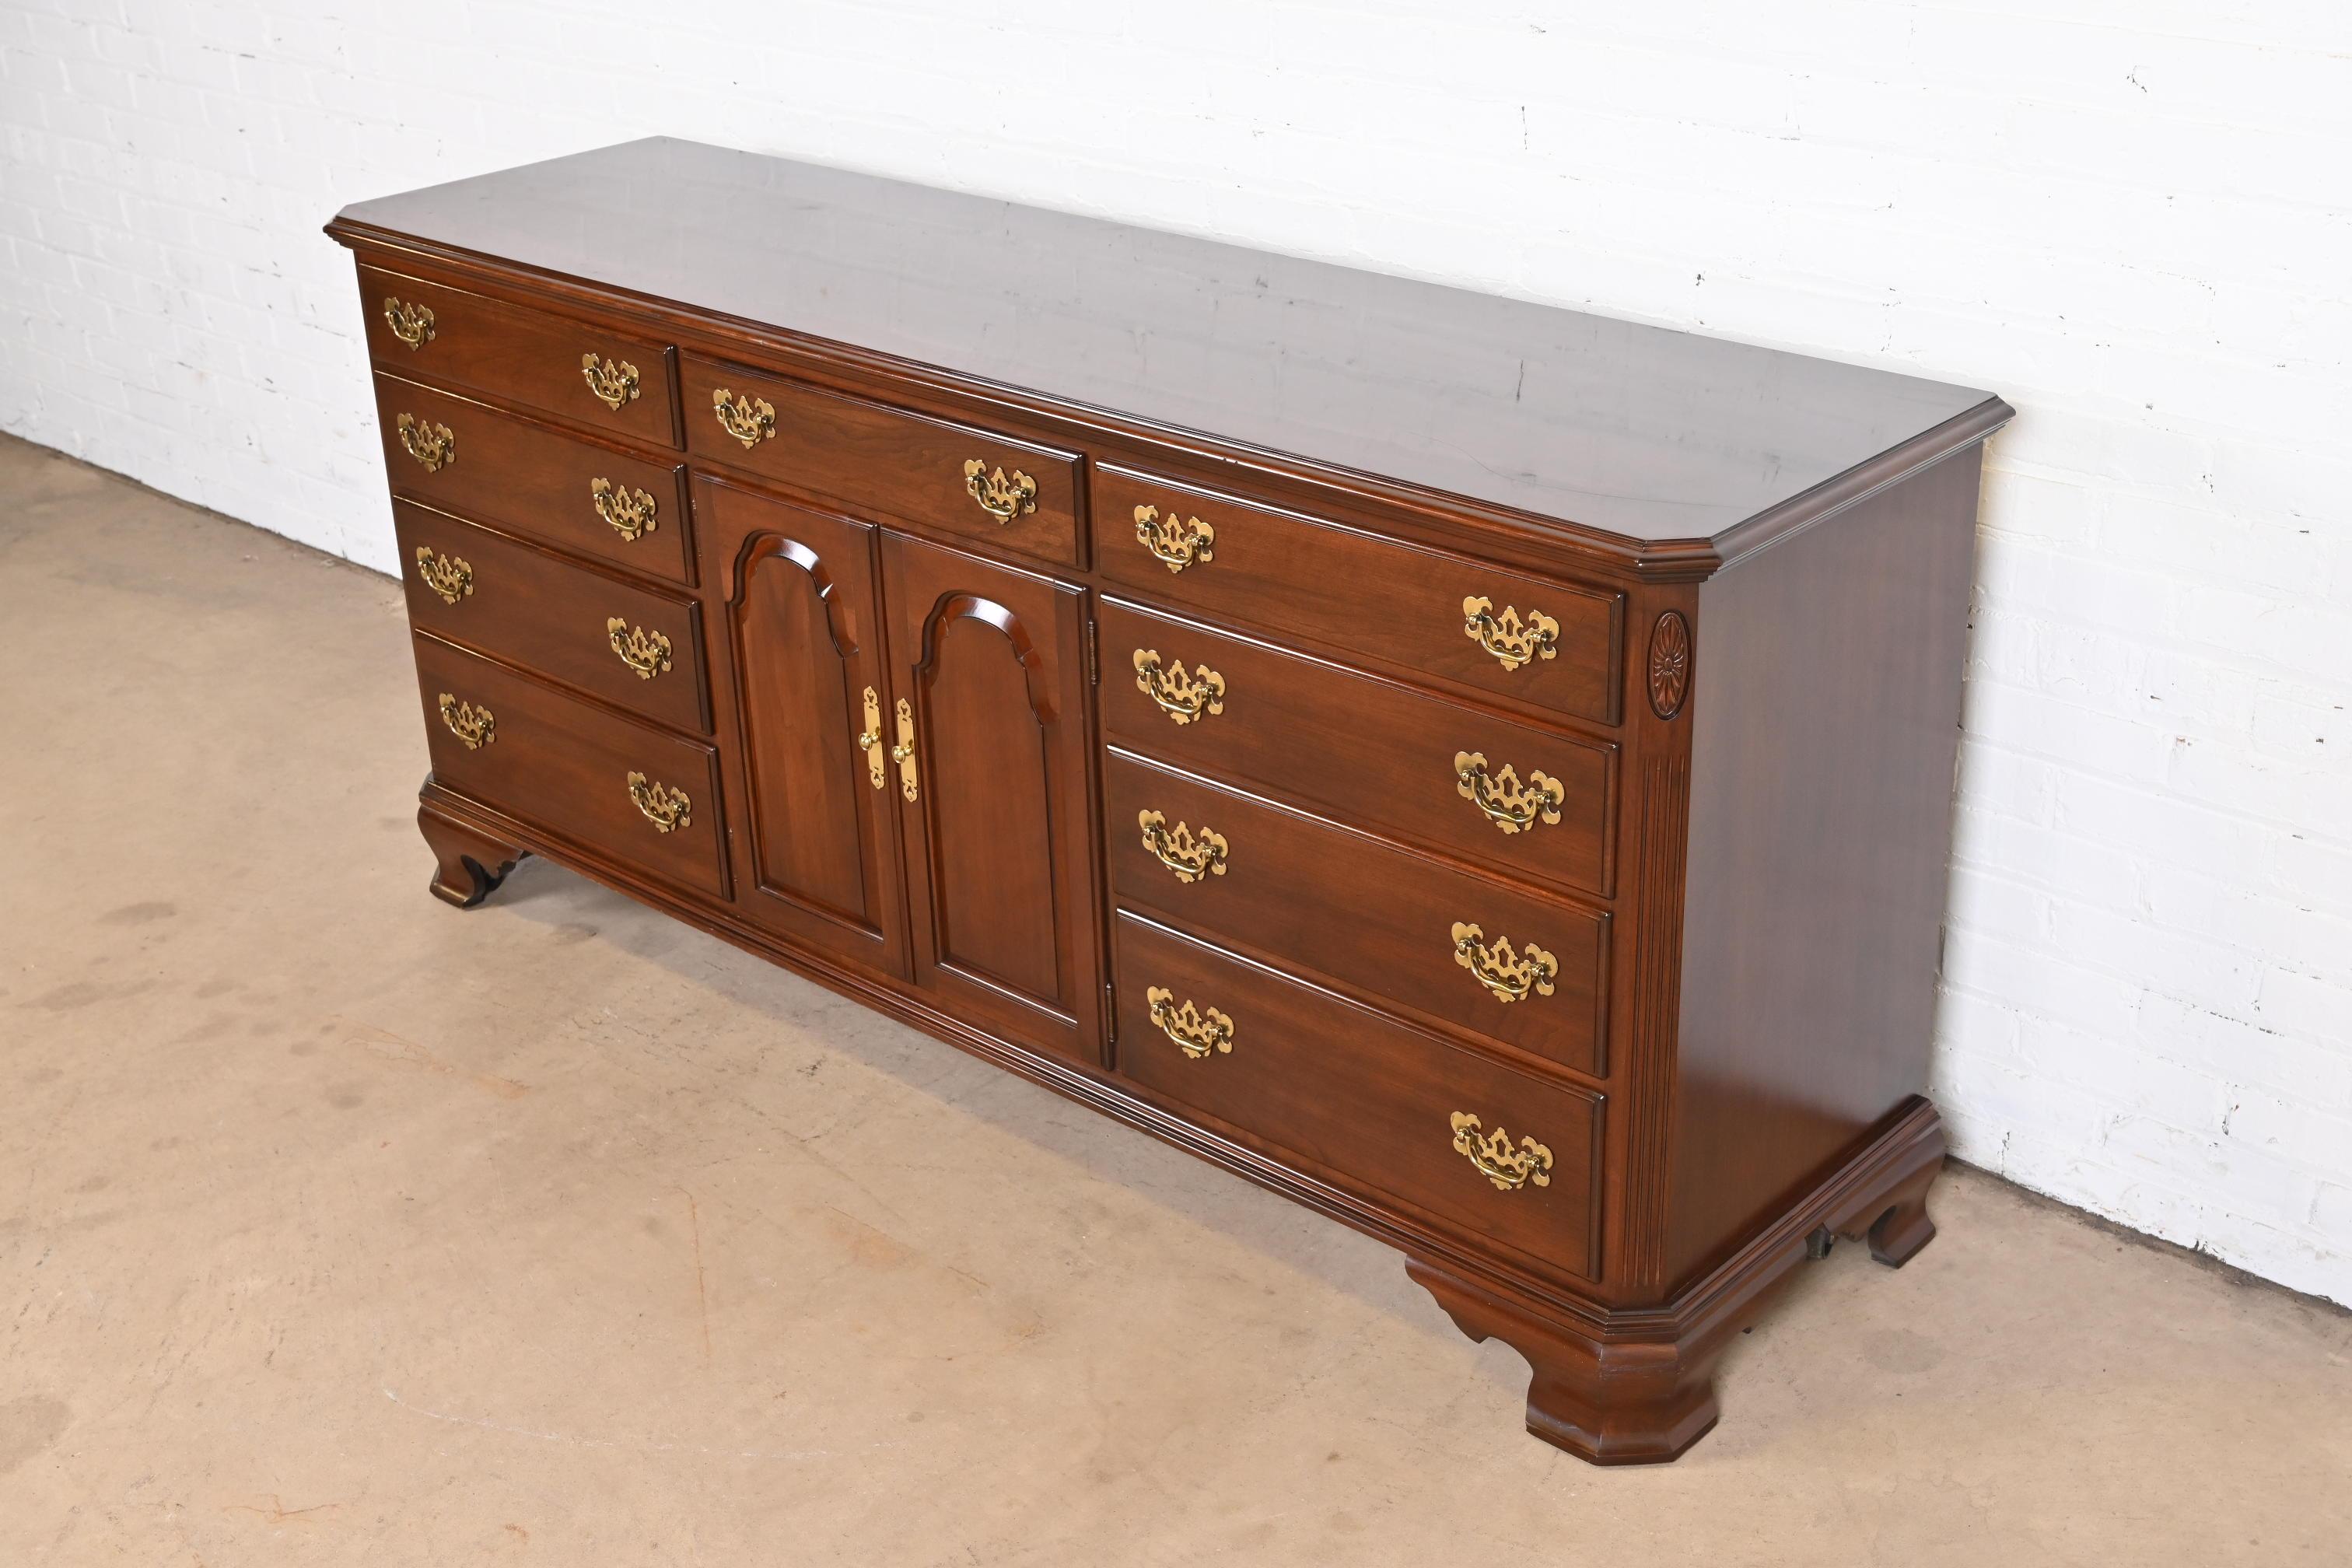 Late 20th Century Ethan Allen Georgian Solid Cherry Wood Long Dresser or Credenza